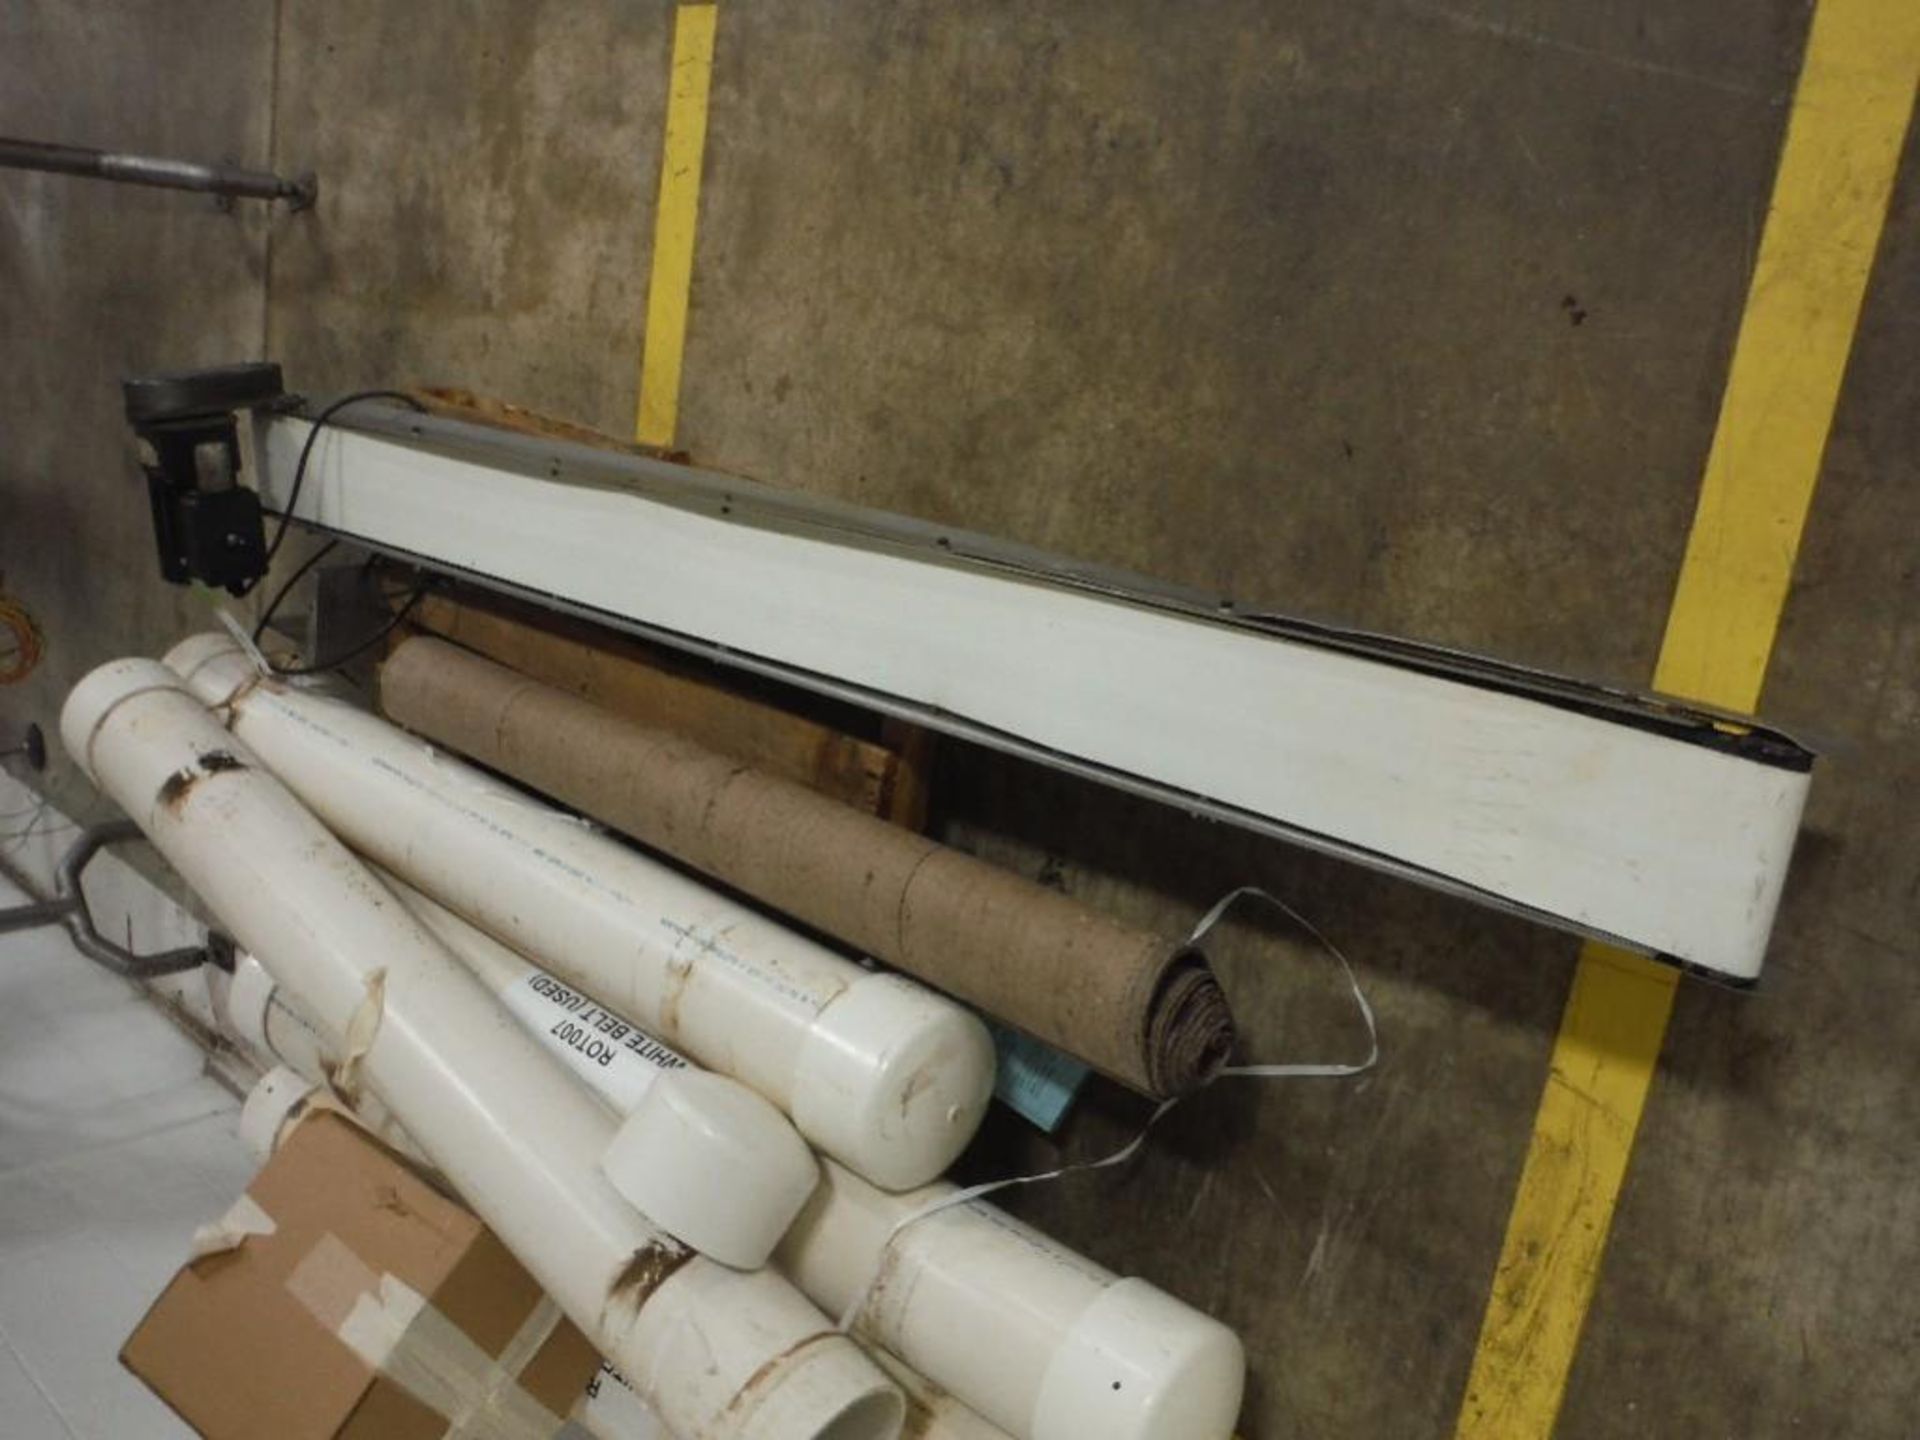 Portable belt conveyor, 84 in. long x 6 in. wide, 5 pvc tubes with belts, approx. 48 in. wide - Rigg - Image 2 of 3